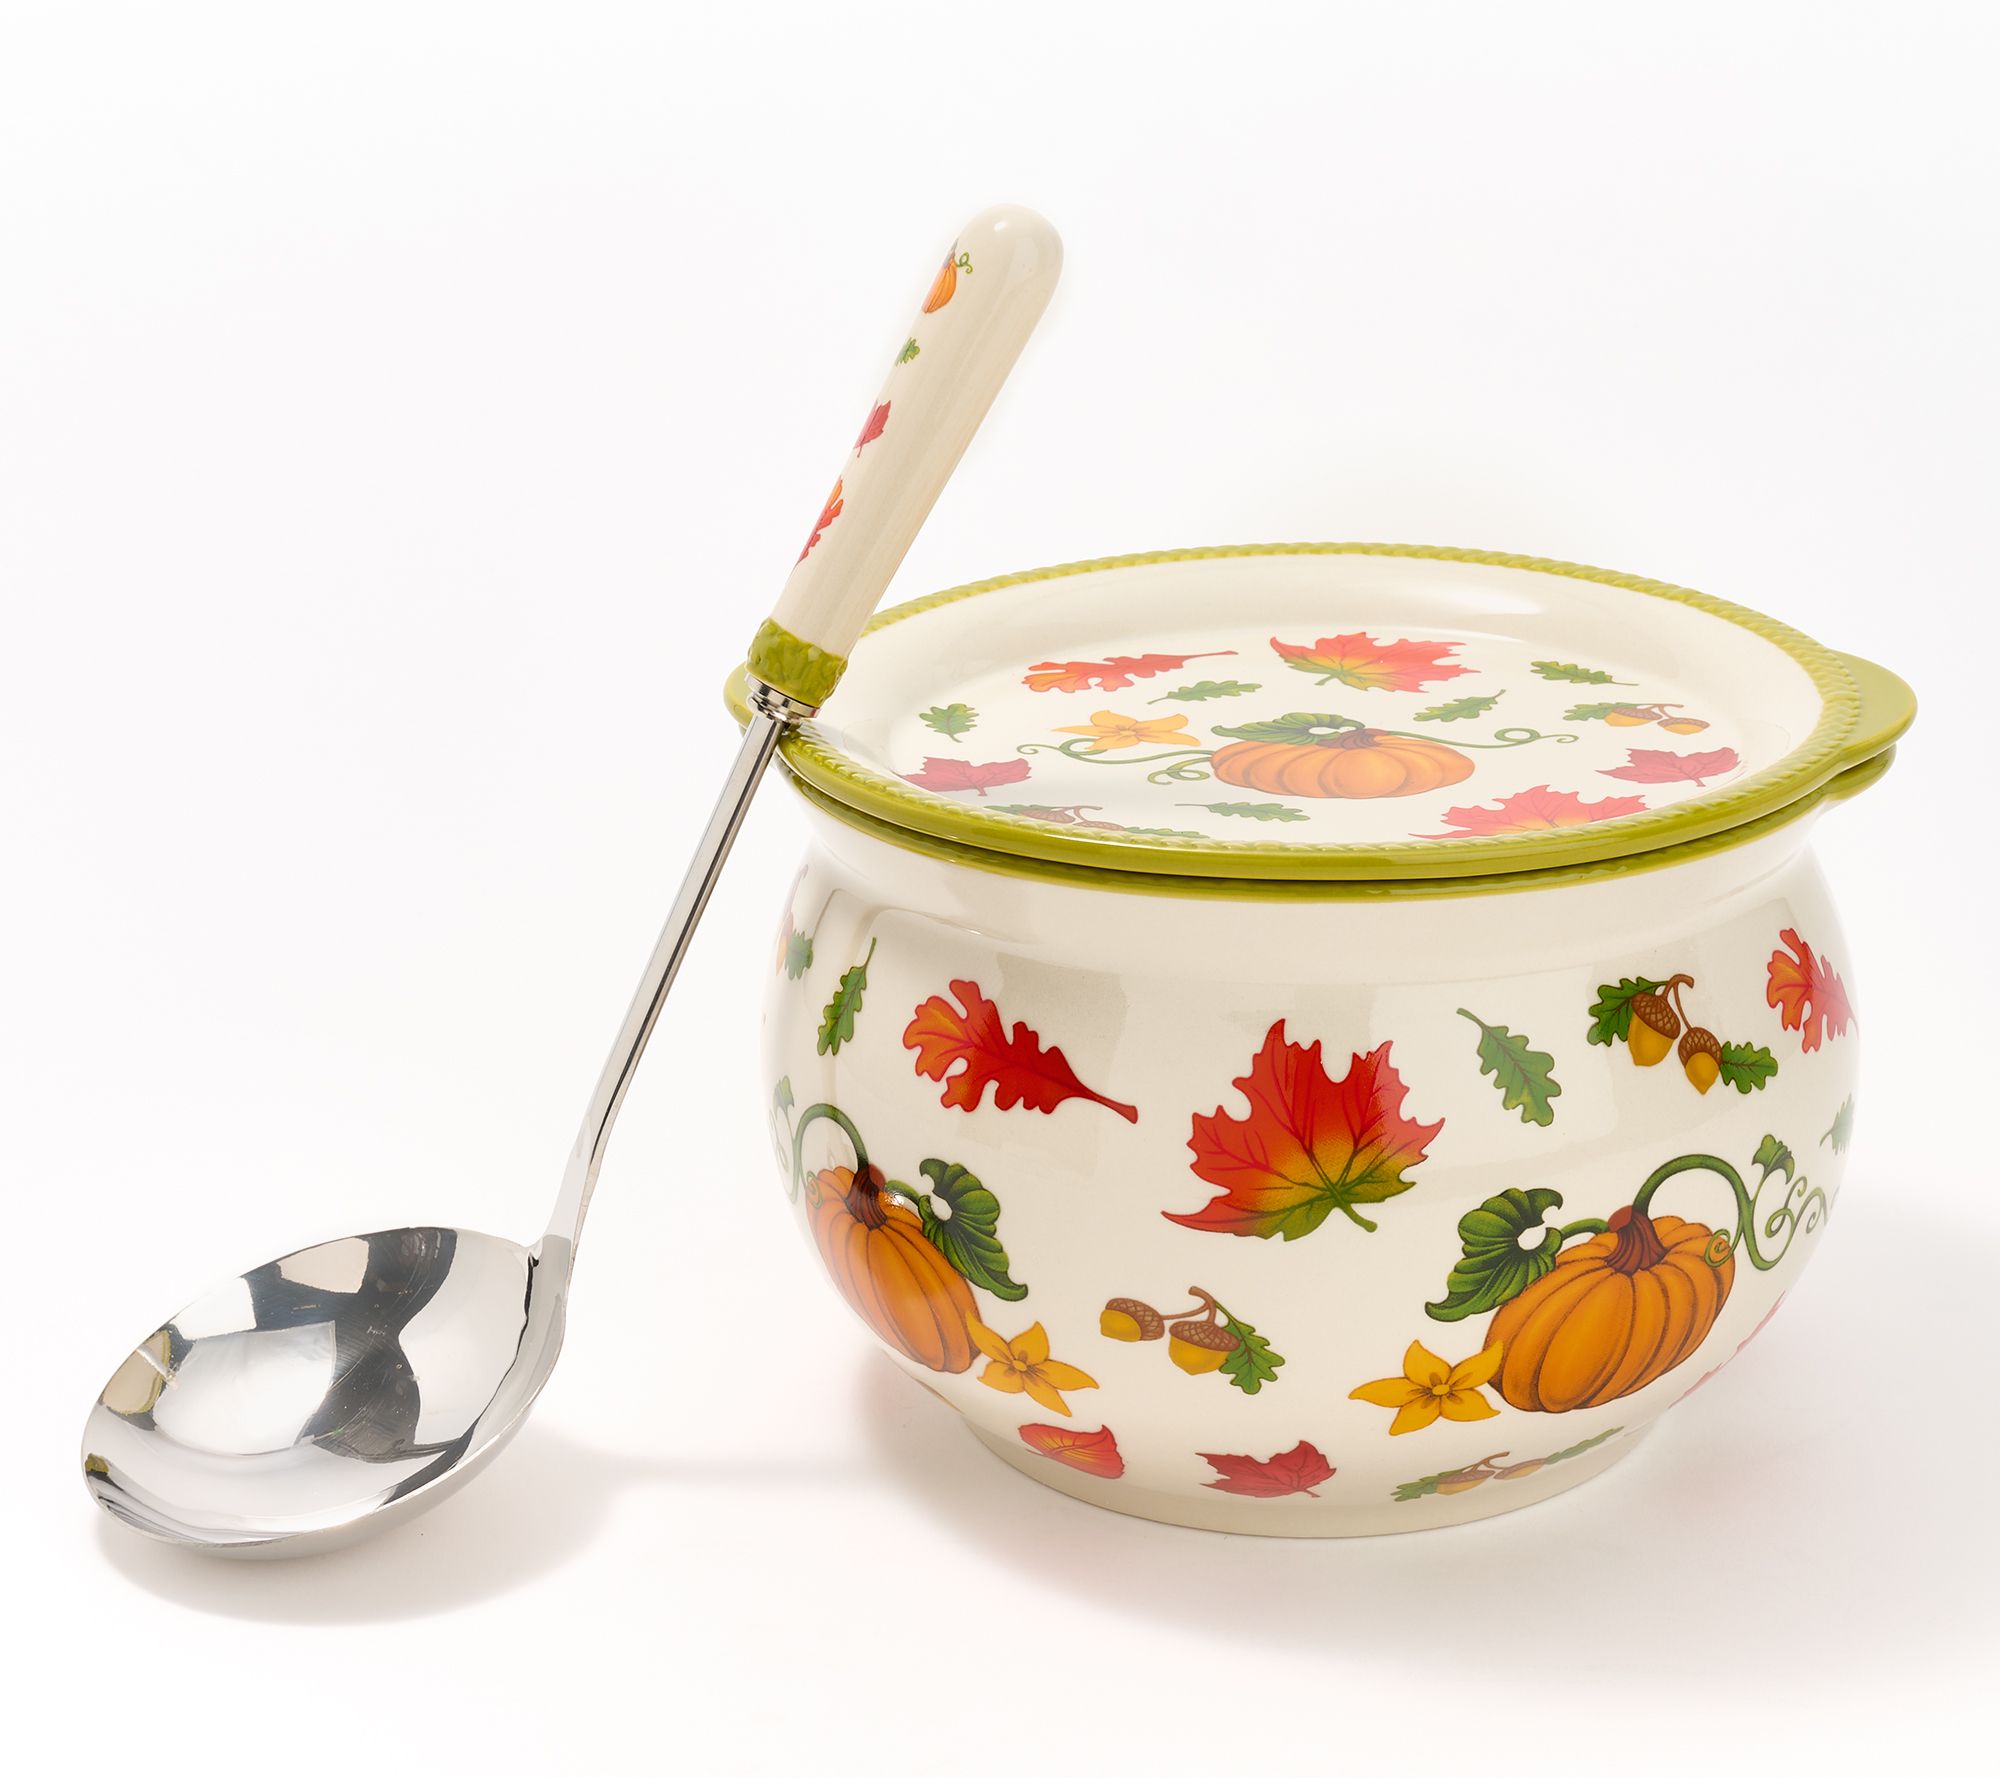 Ceramic Chili Pot With Lid AND Ladle